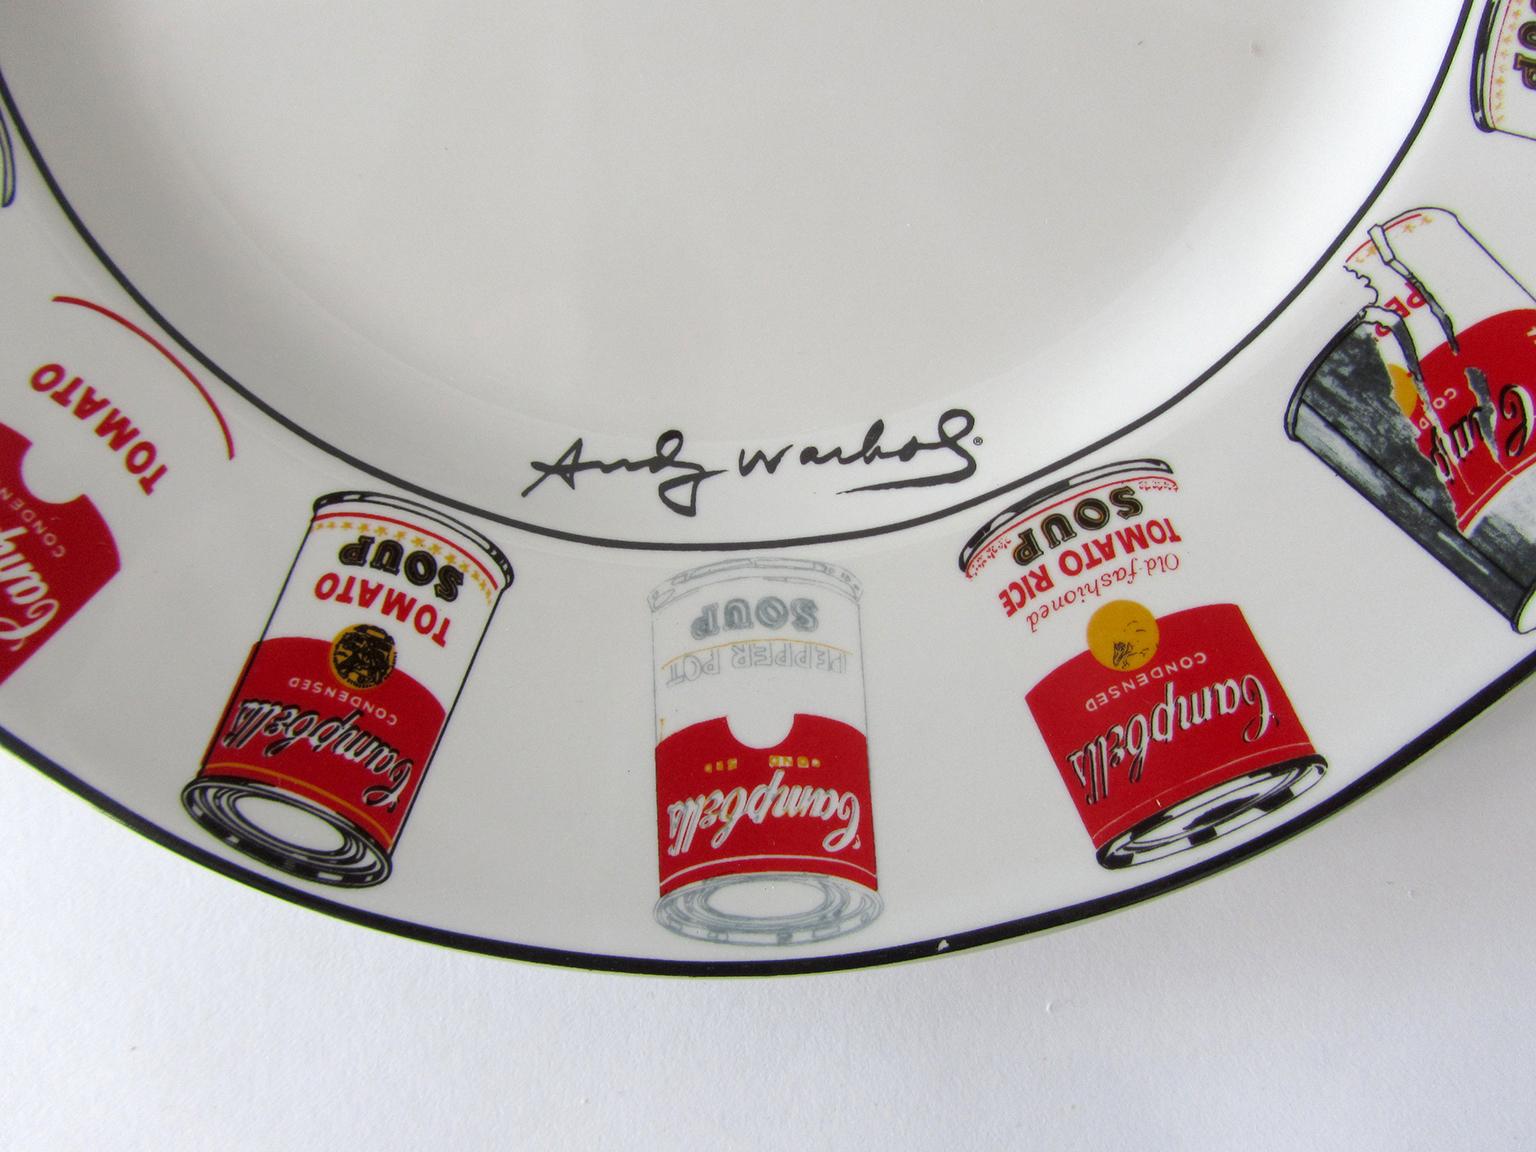 American Set of 12 Place Settings Andy Warhol White Campbells Soup Dinnerware